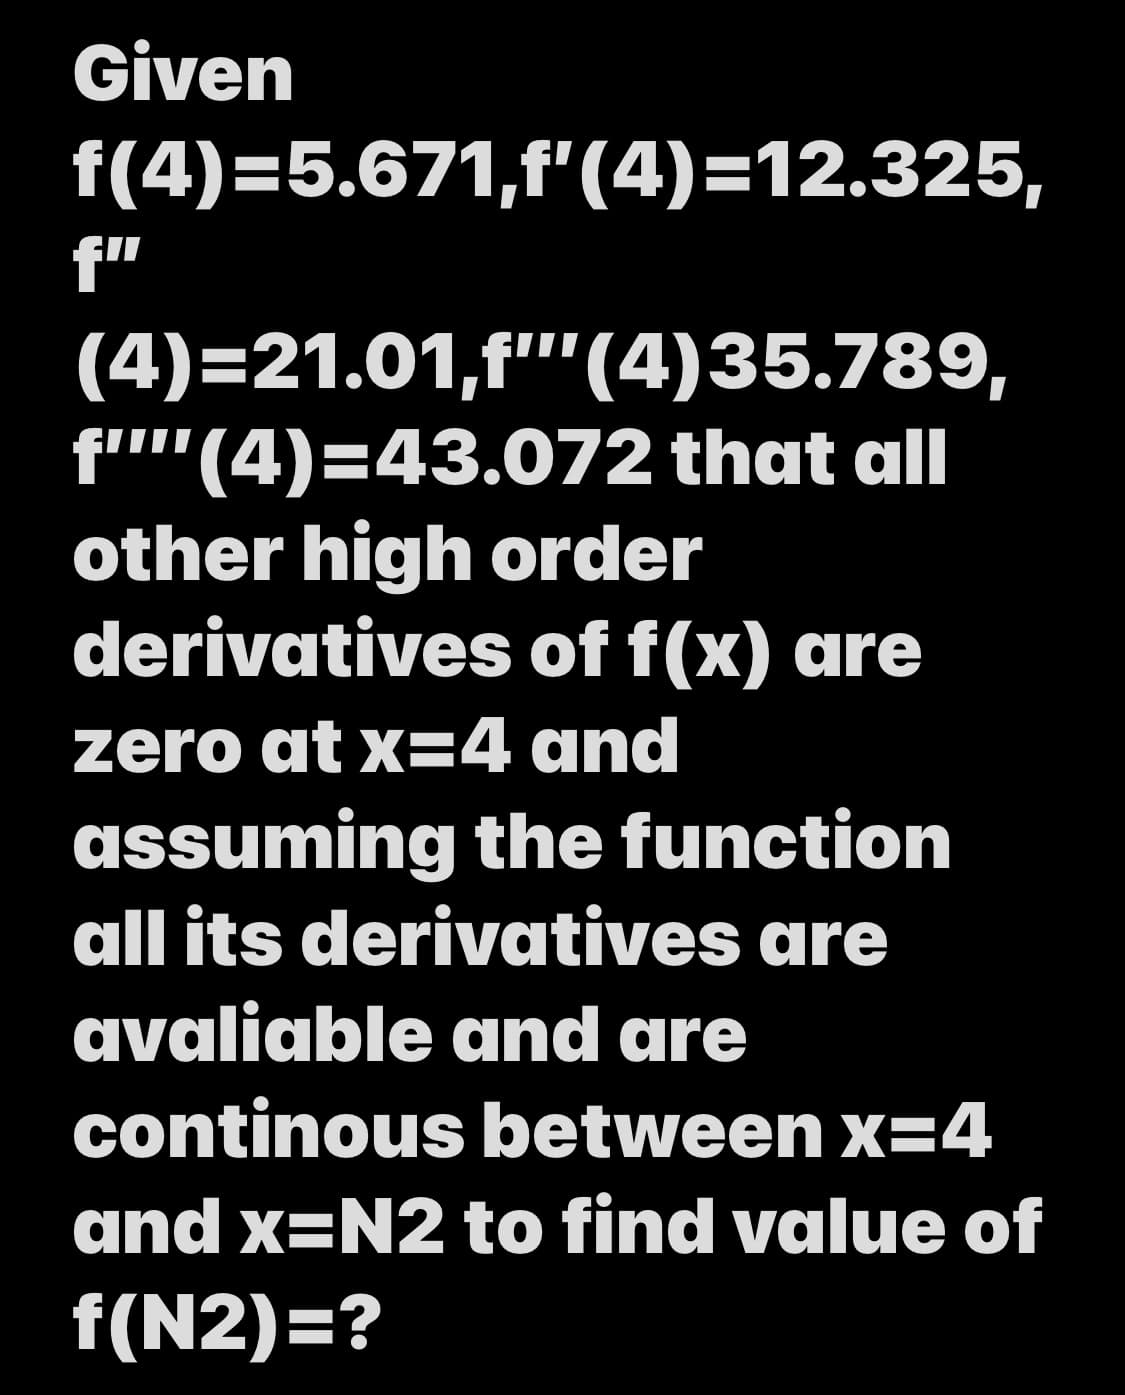 Given
f(4)=5.671,f'(4)=12.325,
f"
(4)=21.01,f"'(4)35.789,
f''(4)=43.072 that all
other high order
derivatives of f(x) are
zero at x=4 and
assuming the function
all its derivatives are
avaliable and are
continous between x=4
and x=N2 to find value of
f(N2)=?
